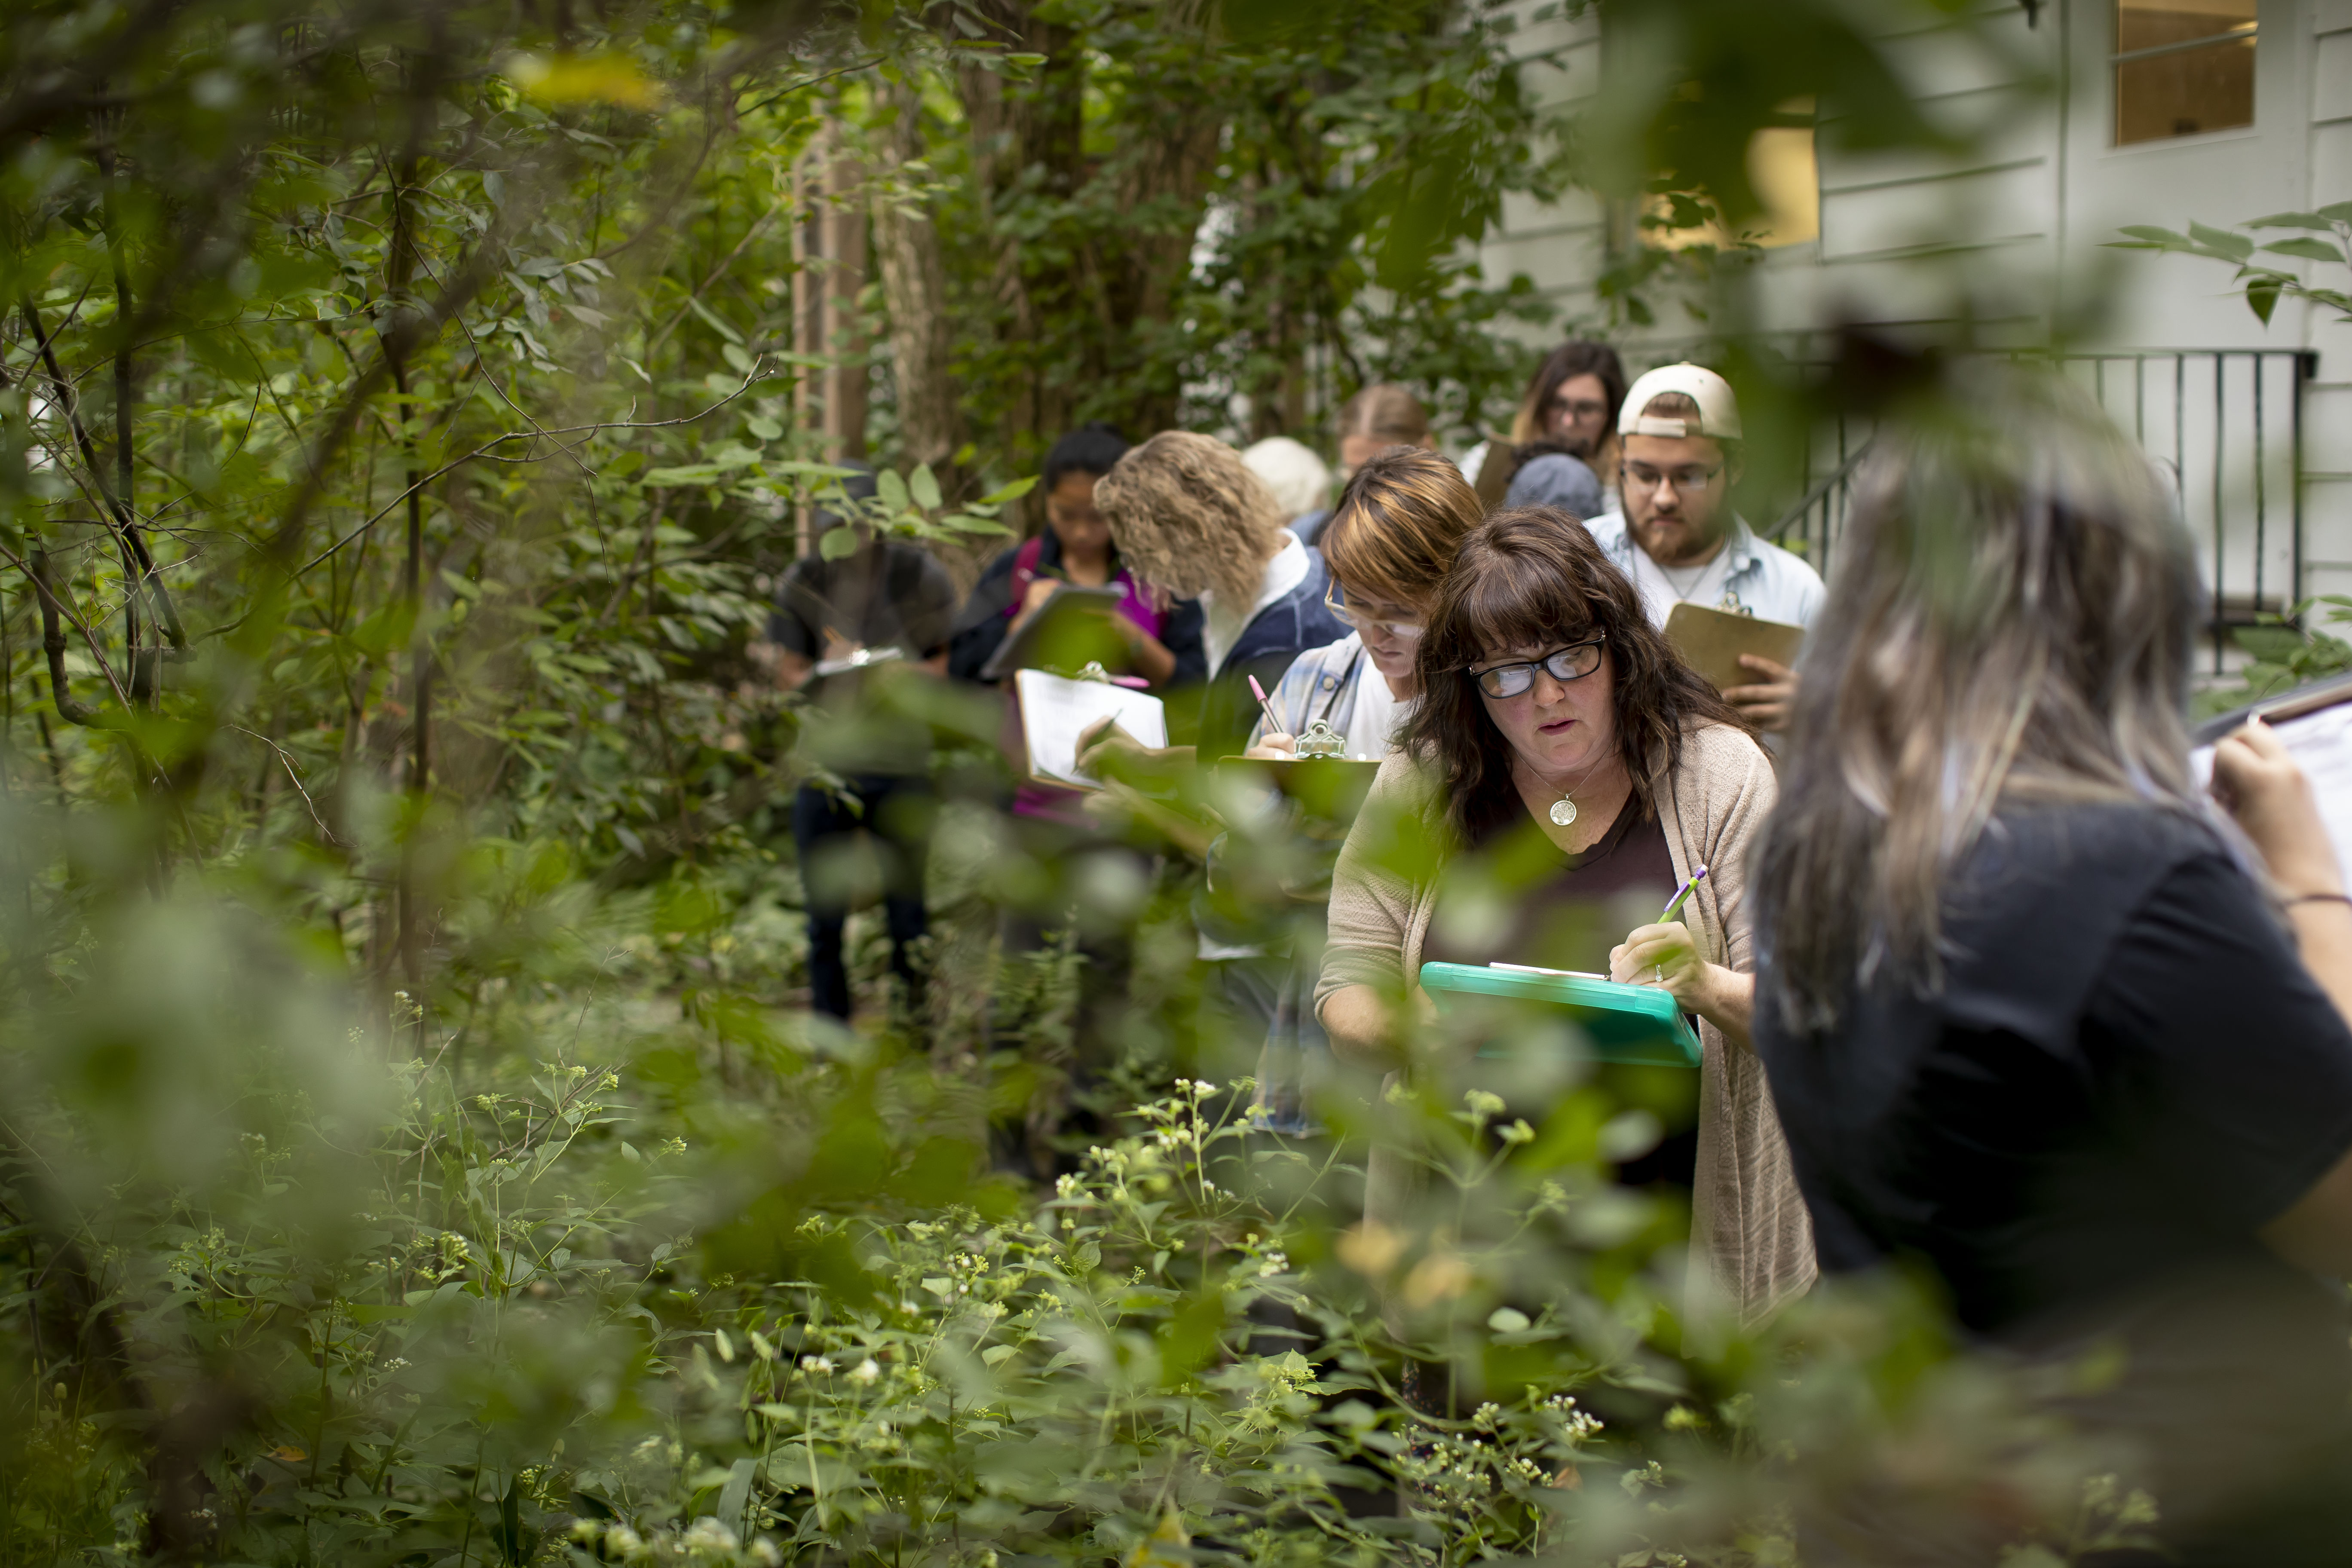 Students stand next to plants jotting down notes on clipboards.